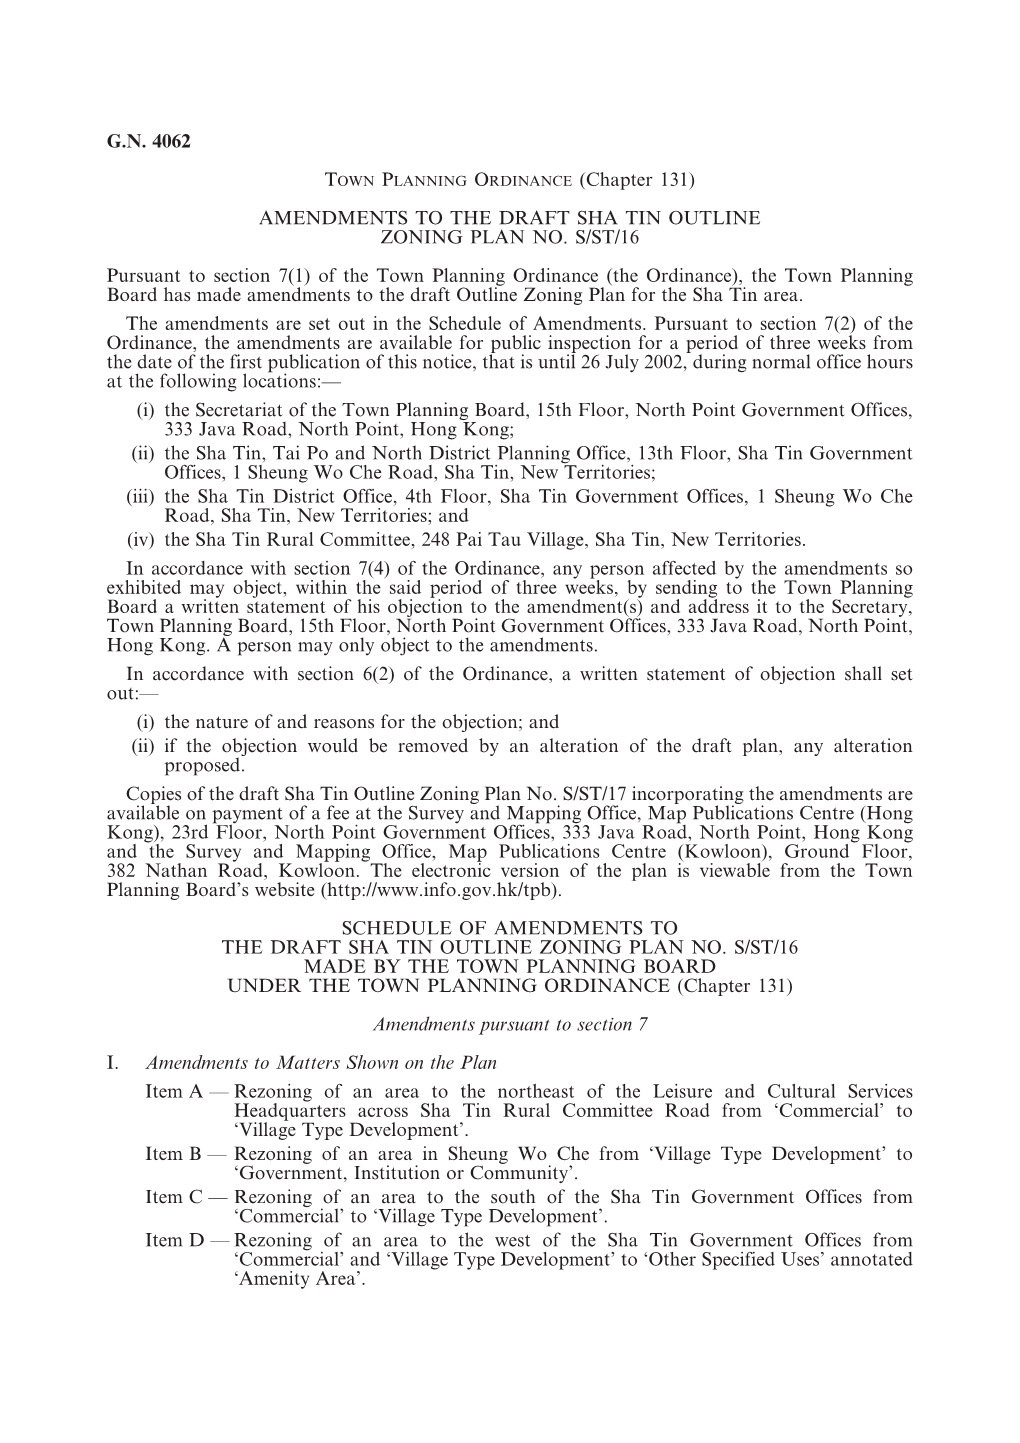 Amendments to the Draft Sha Tin Outline Zoning Plan No. S